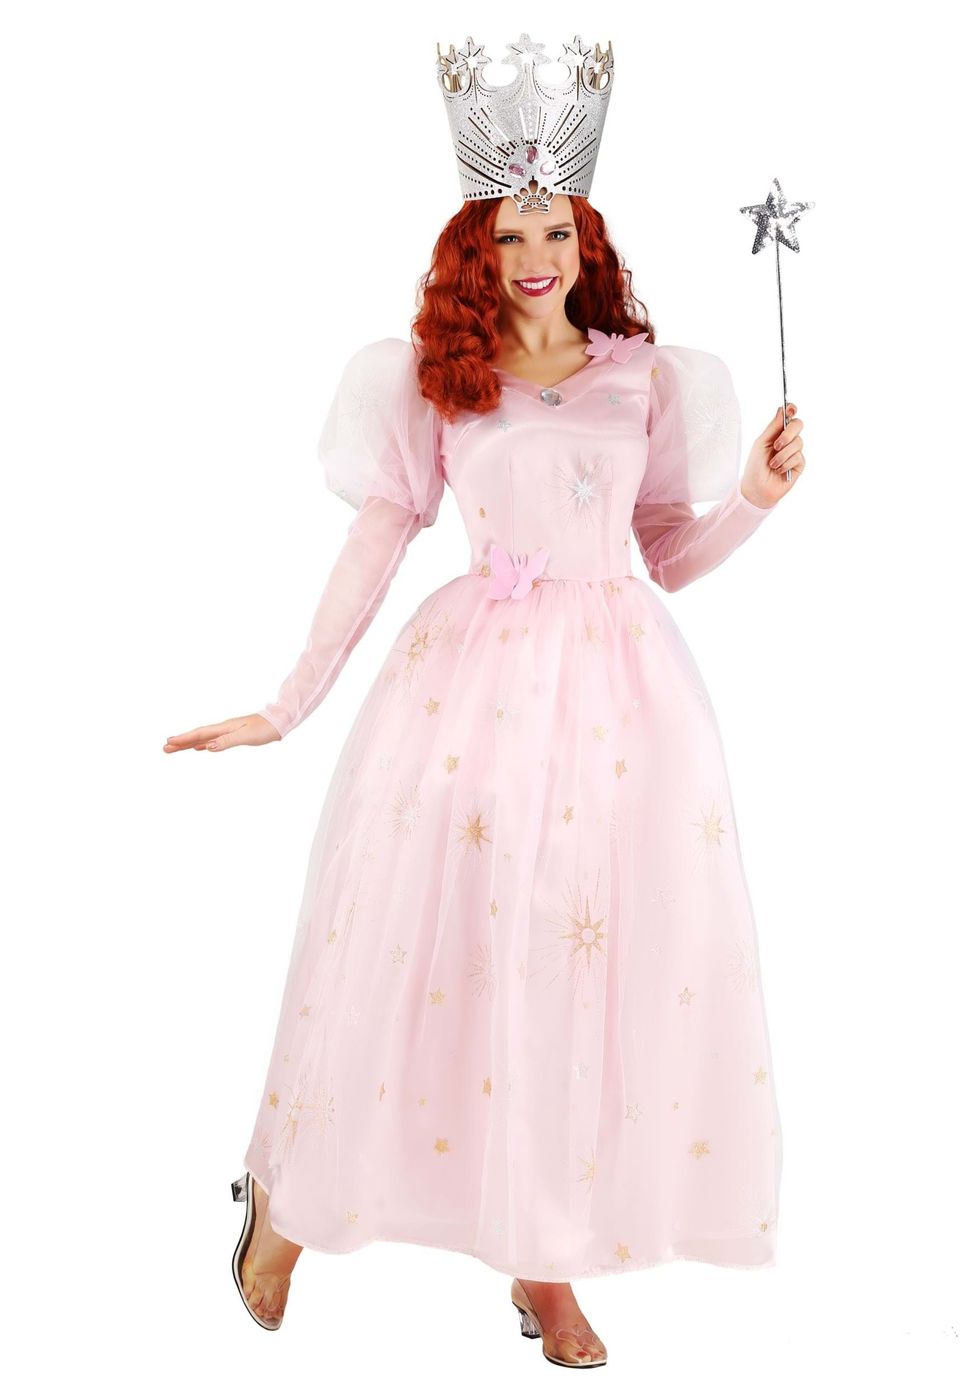 Glenda the Good Witch from "Wizard of Oz"